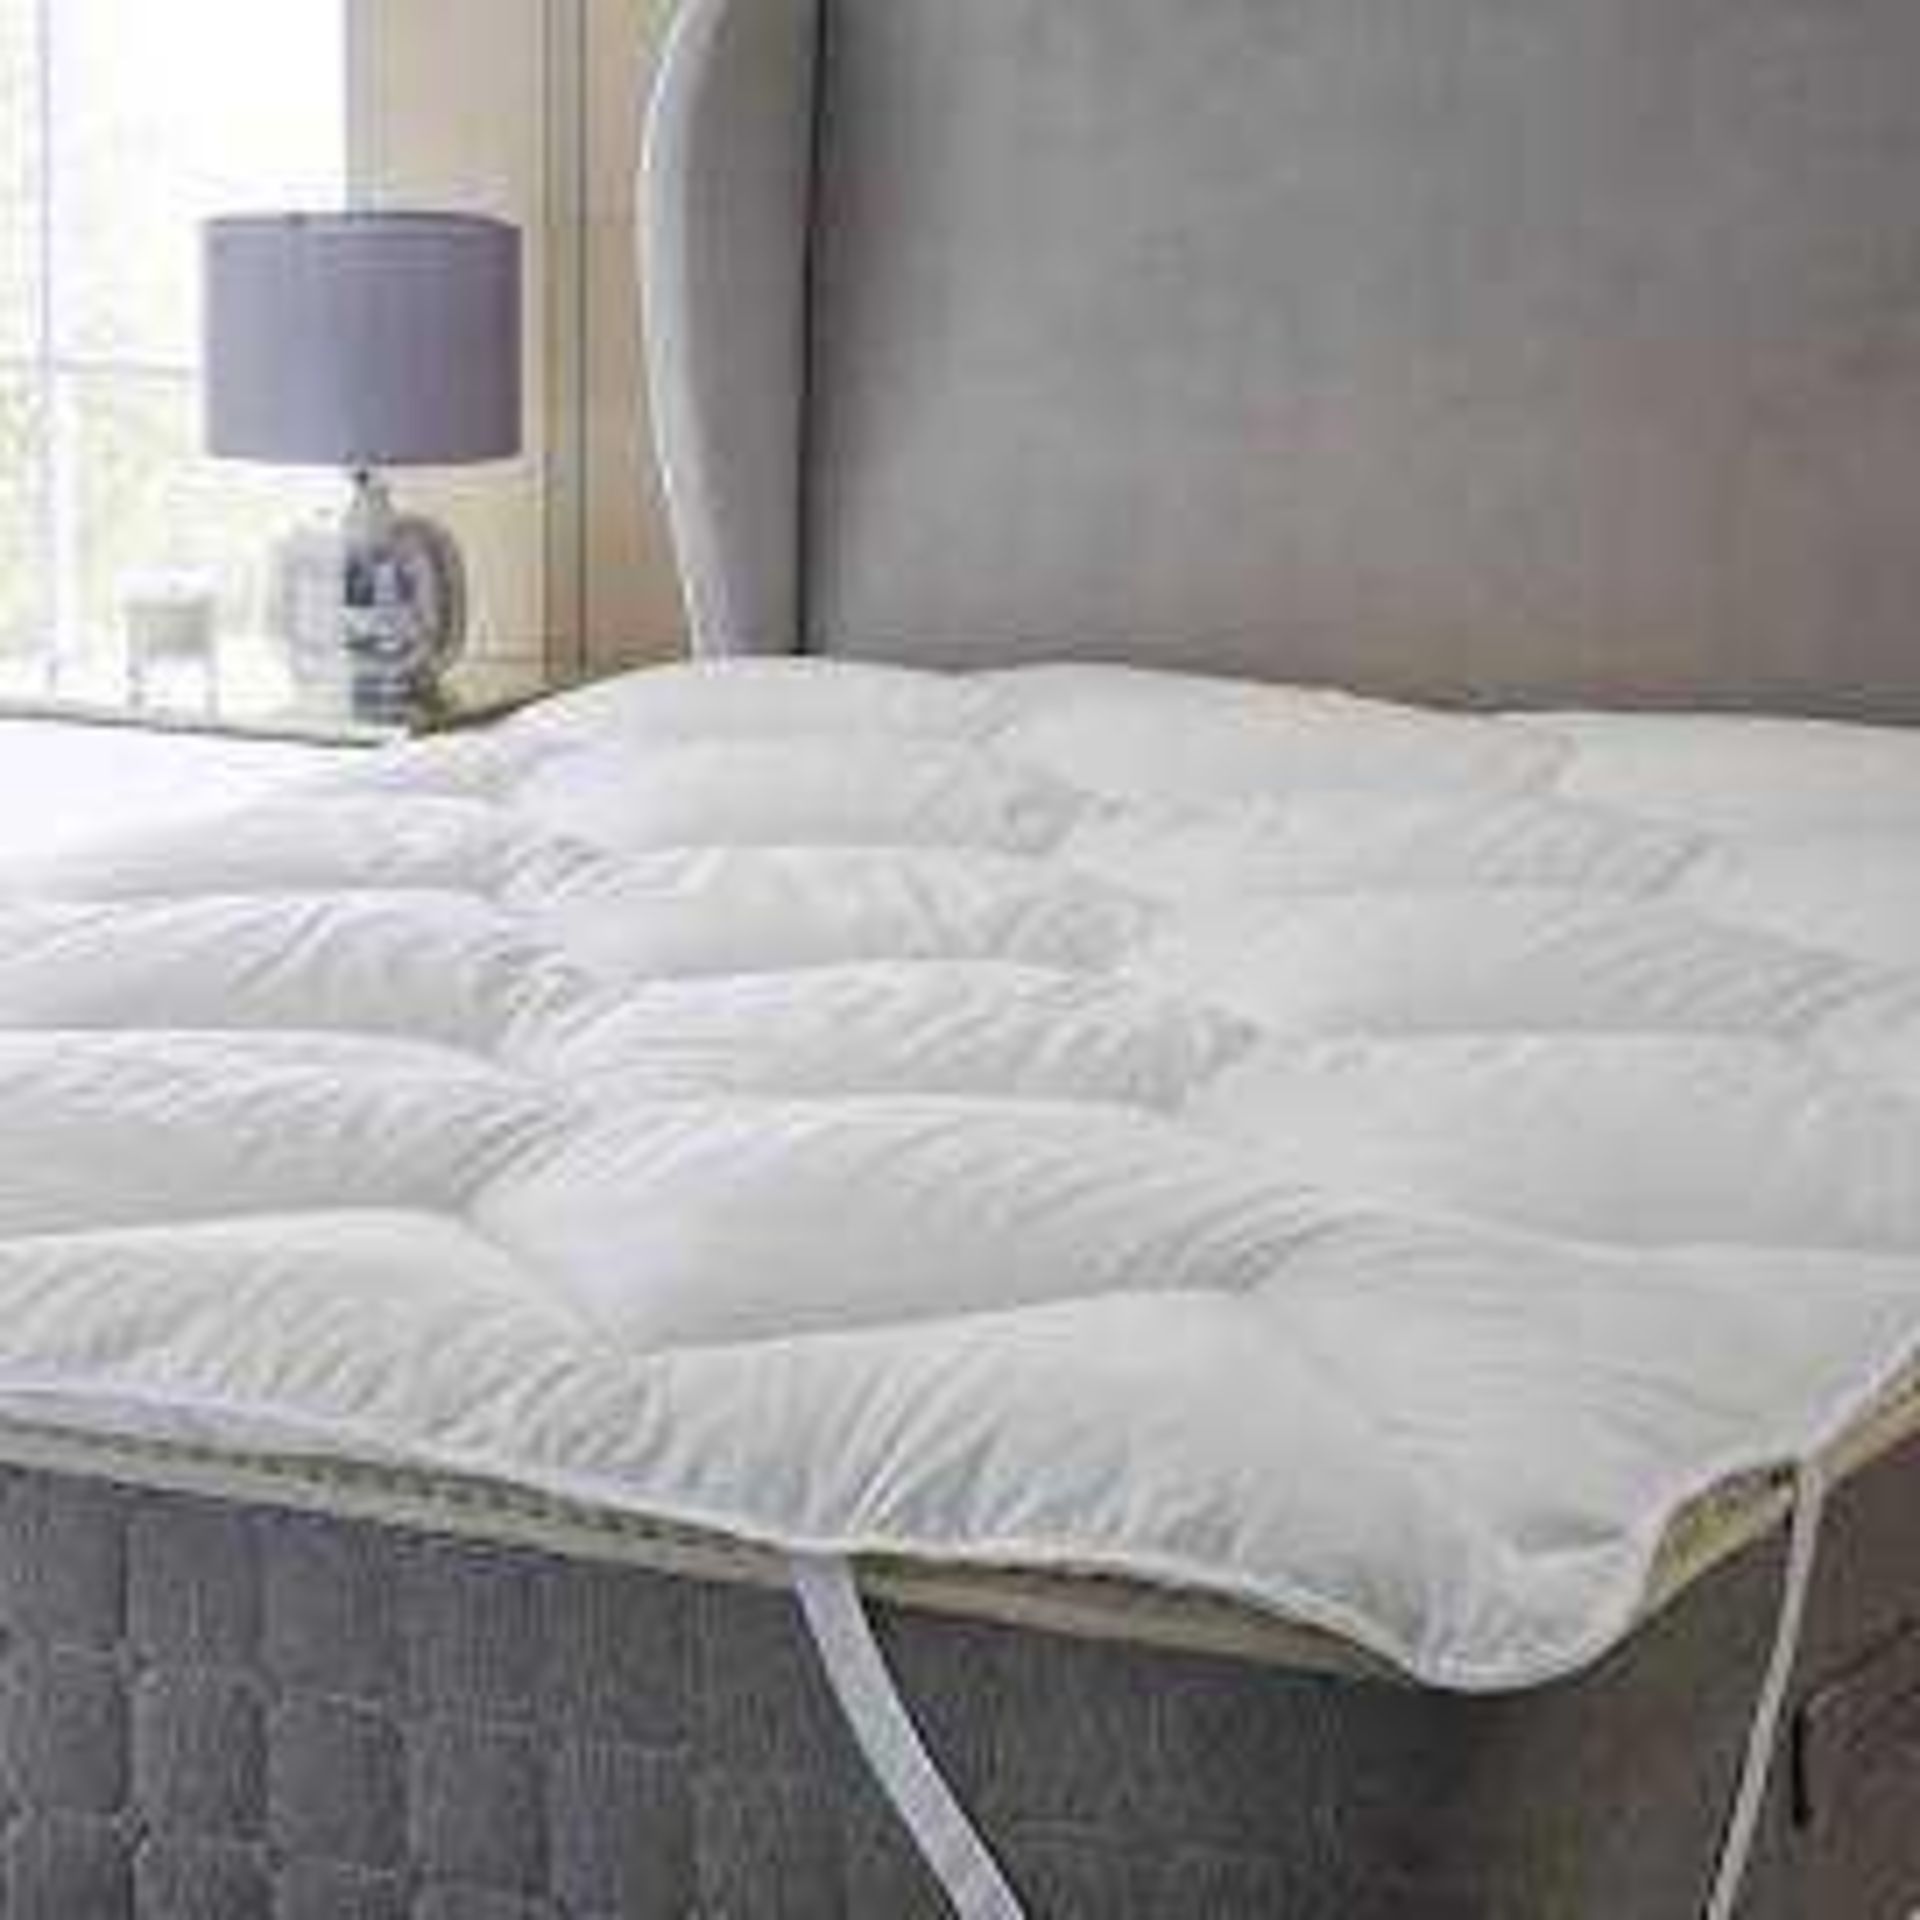 RRP £185 Lot To Contain 2 Bagged John Lewis Soft Touch Washable Mattress Toppers In Sizes Double And - Image 2 of 2